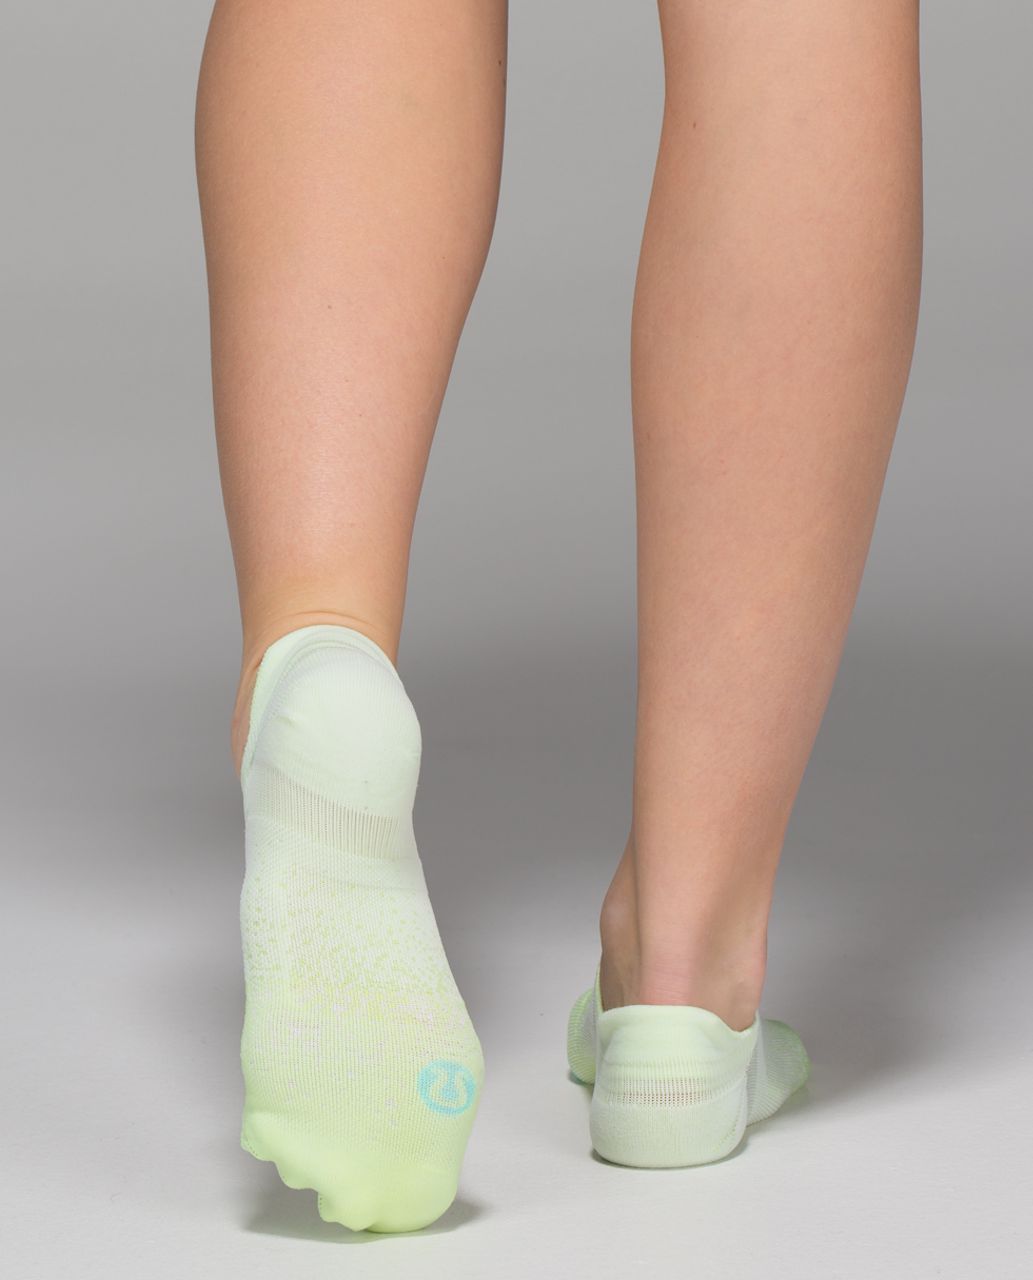 Lululemon Women's Ultimate No Show Run Sock - Dipped Gradient Clear Mint White